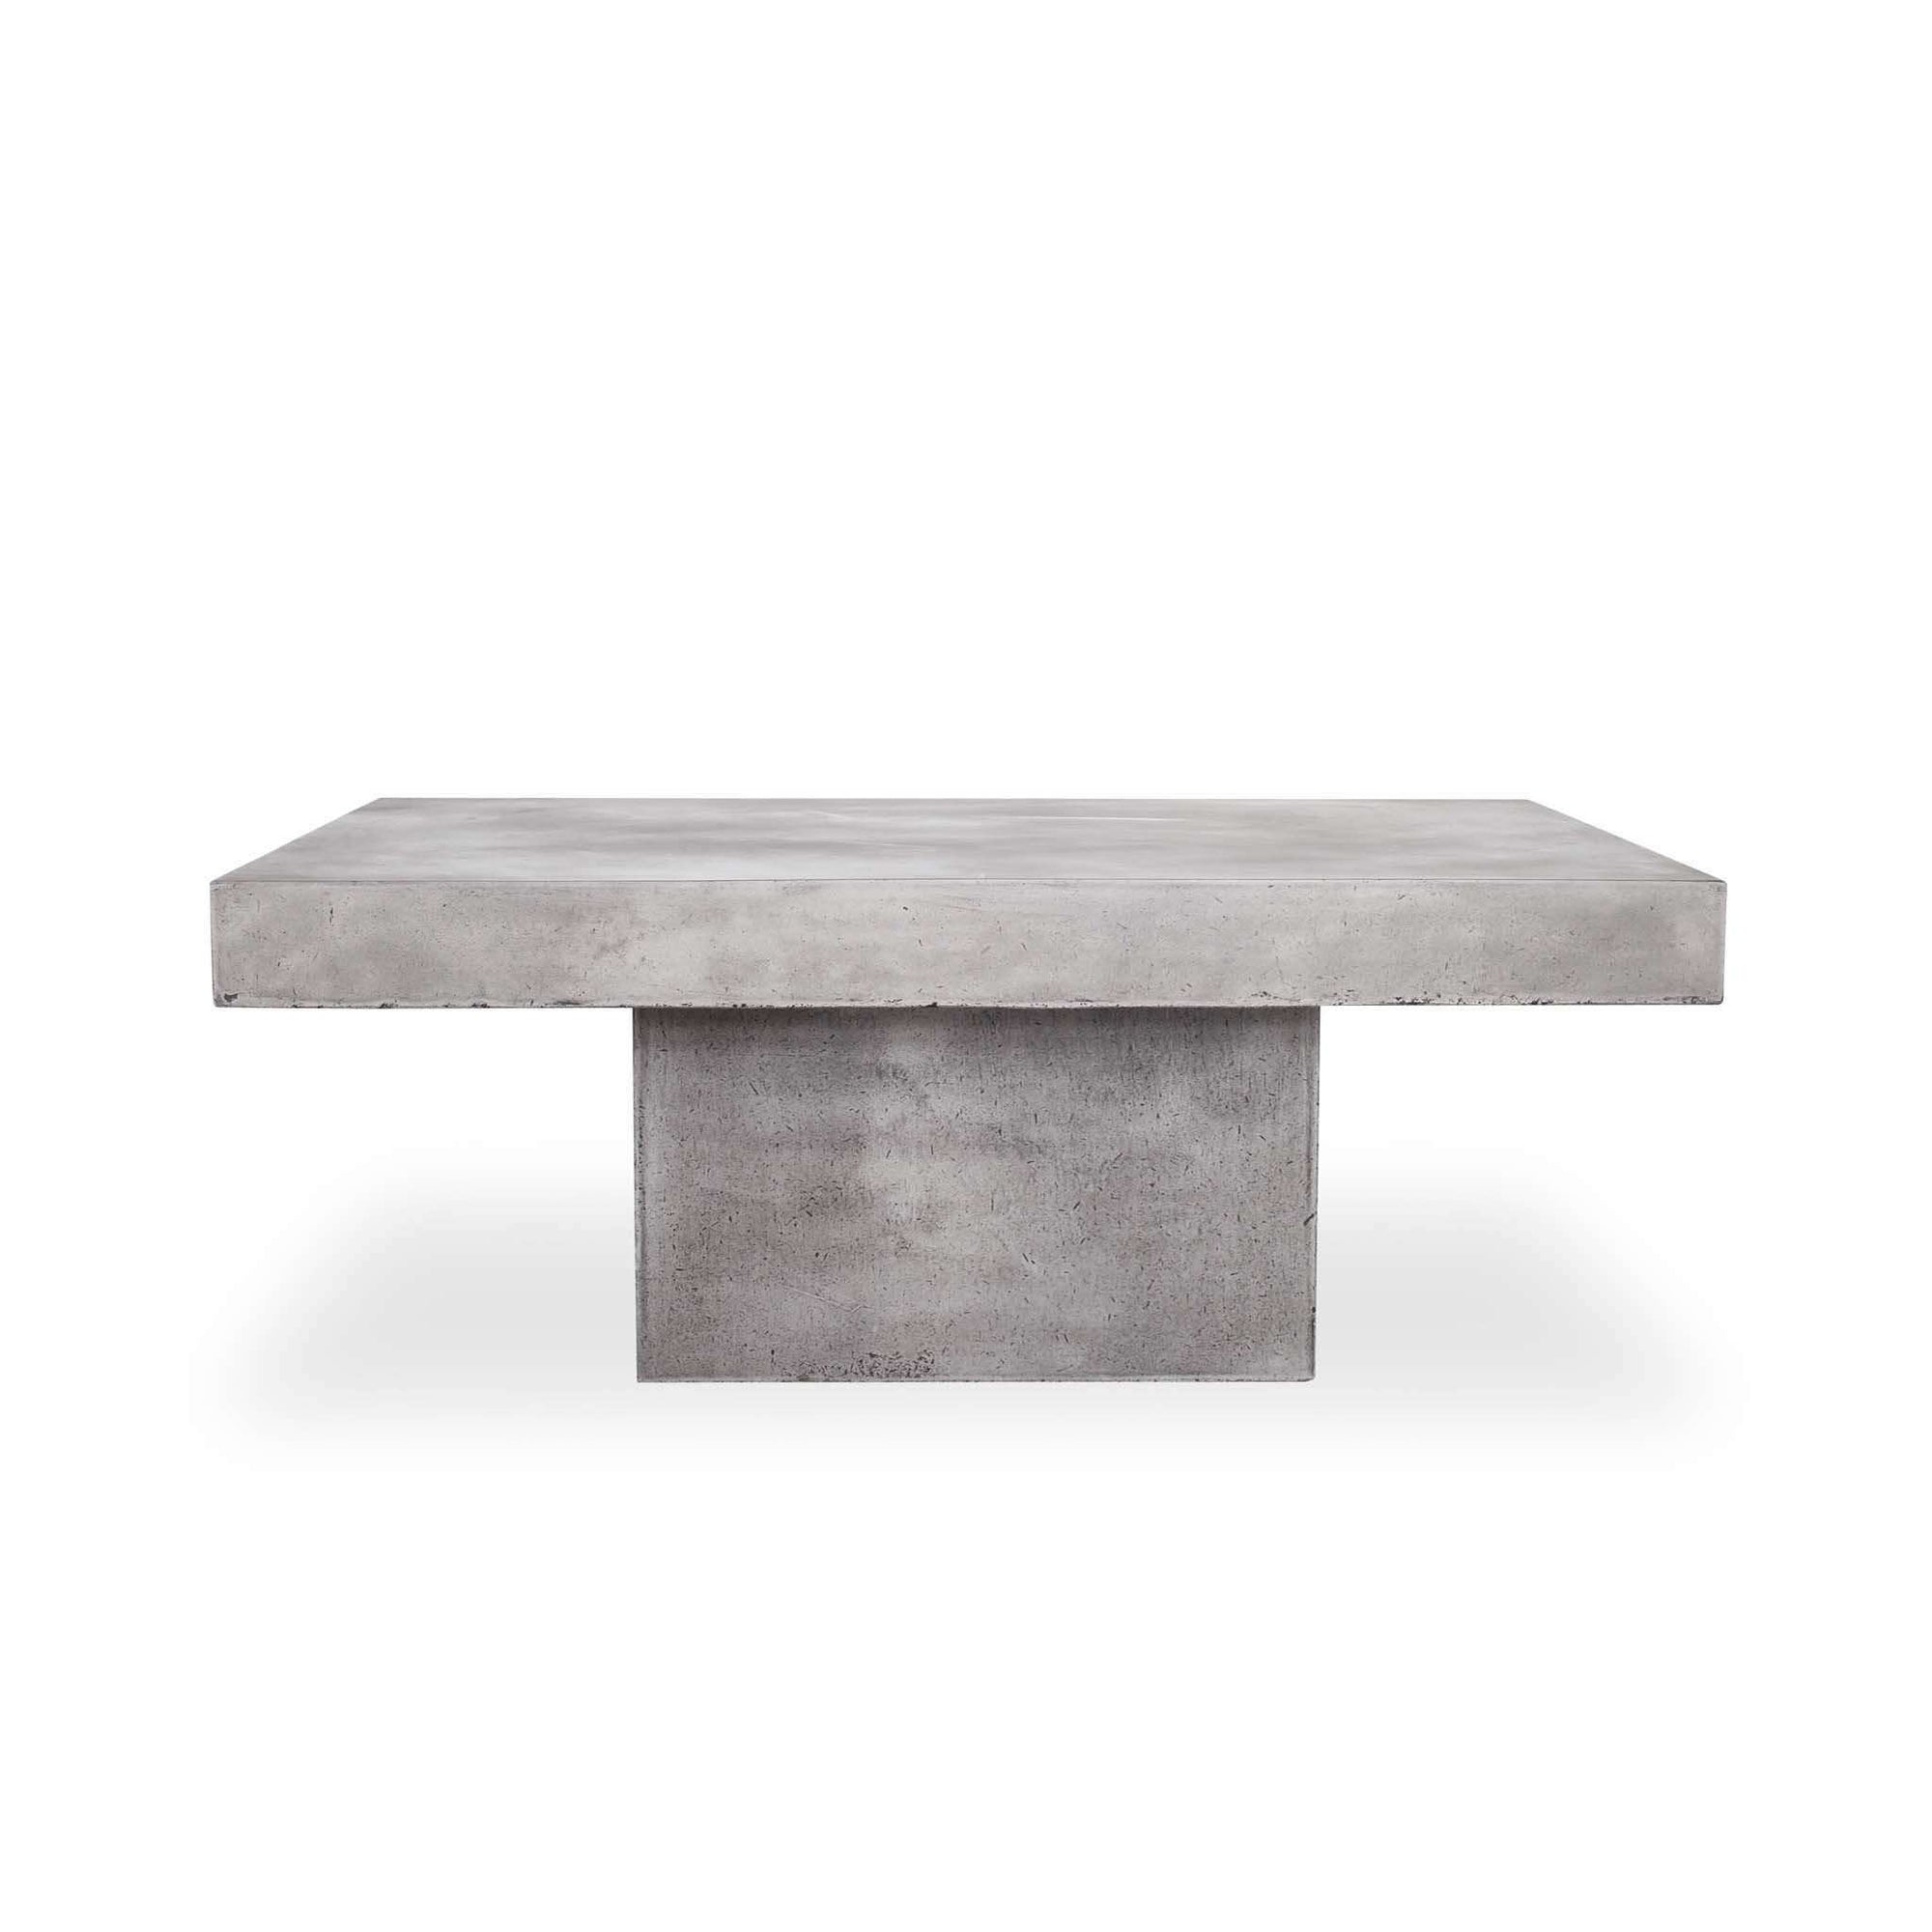 MOES-MAXIMA COFFEE TABLE-Outdoor Coffee Tables-MODTEMPO